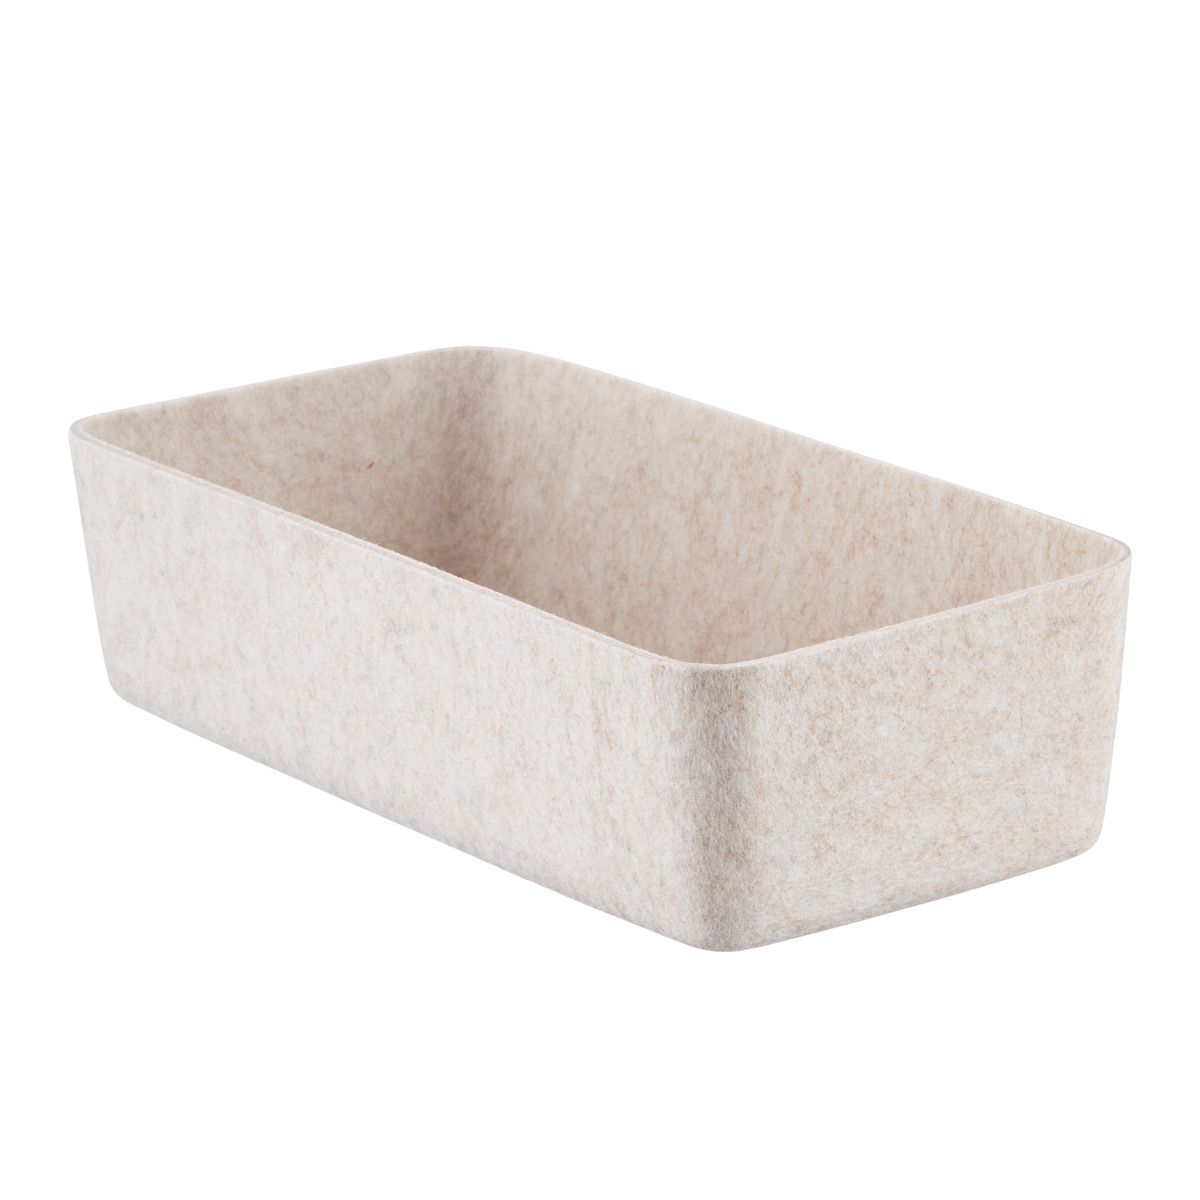 SortJoy Sculpted Long Bin Stone | The Container Store